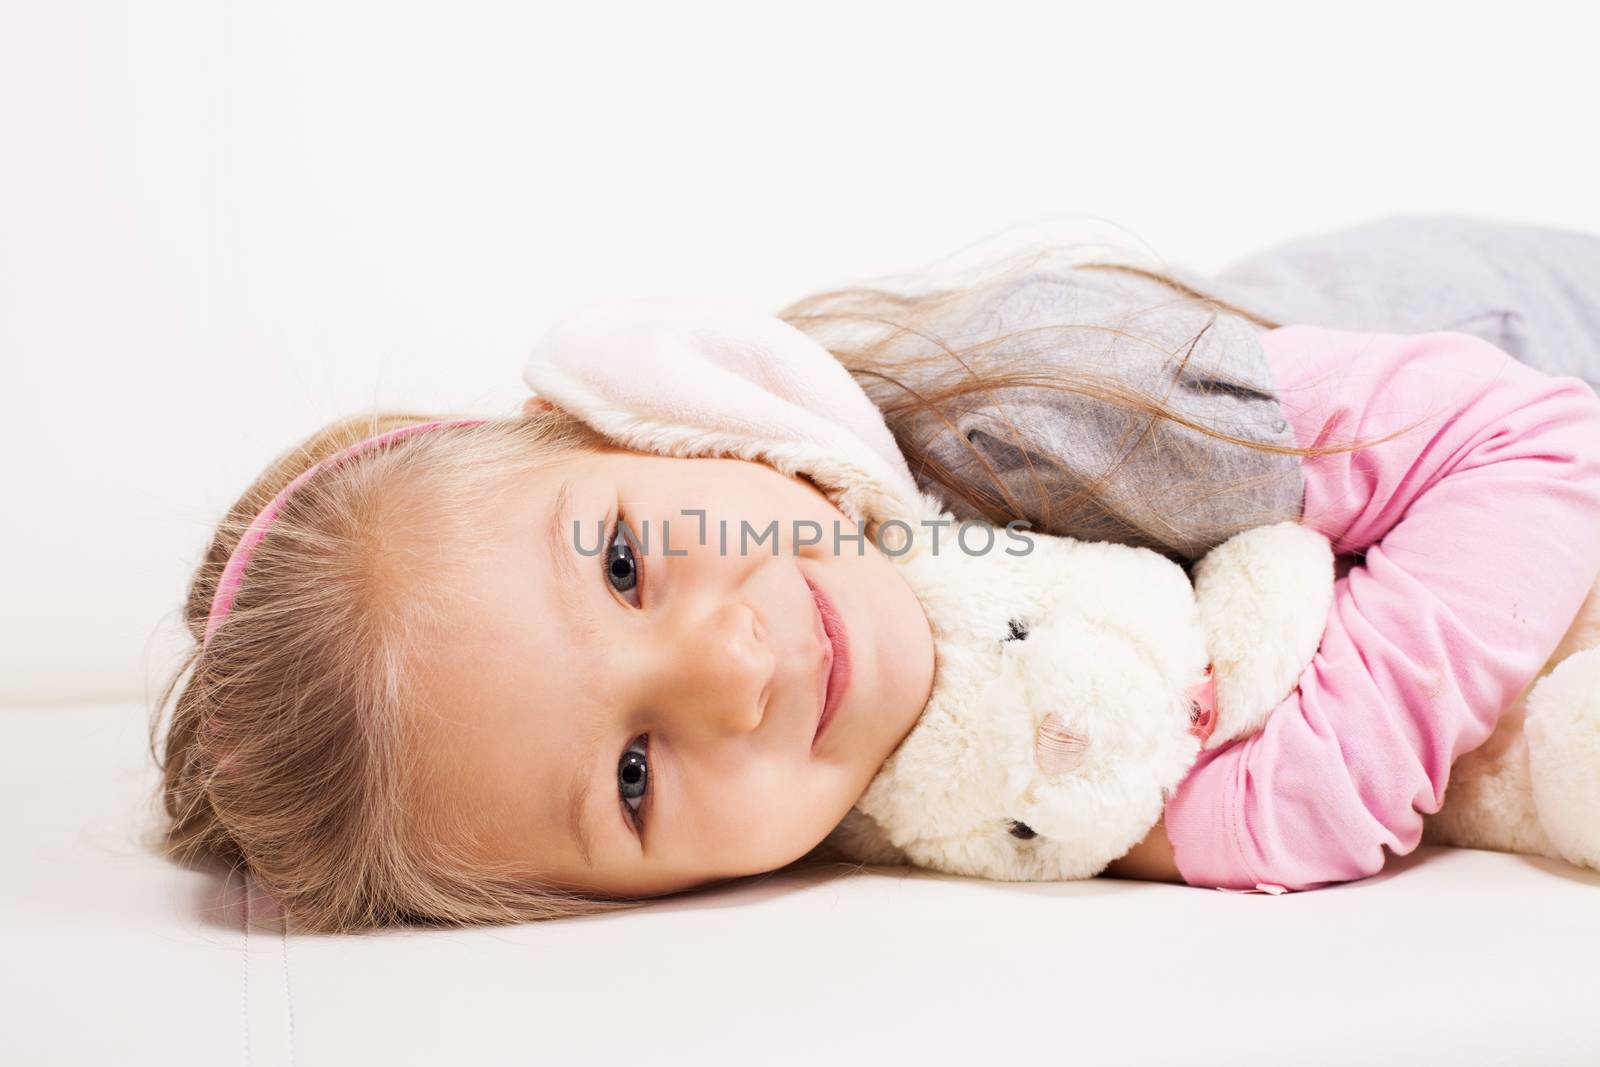 Little Girl With Soft Toy by MilanMarkovic78